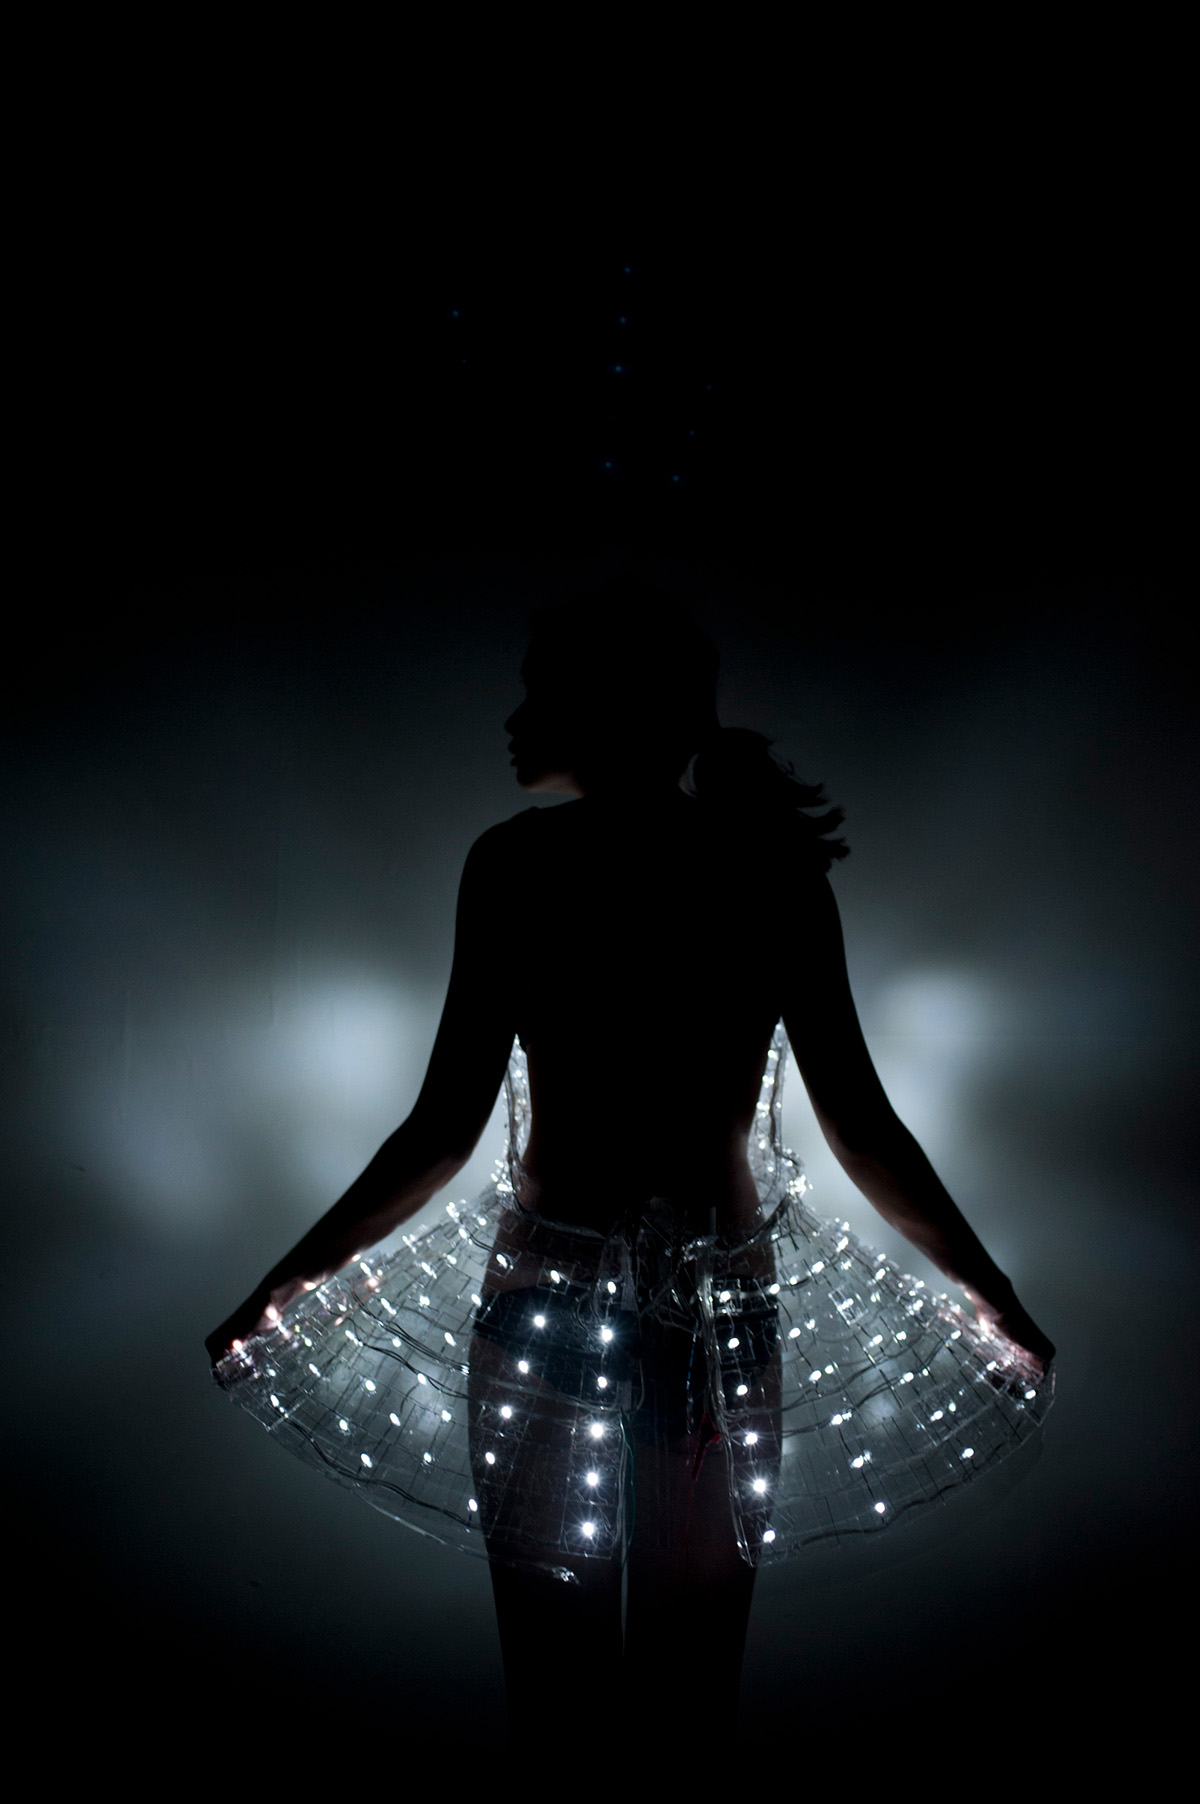 cinderella intoxication led lights Patterns lilypard Arduino interactive Wearable Technology